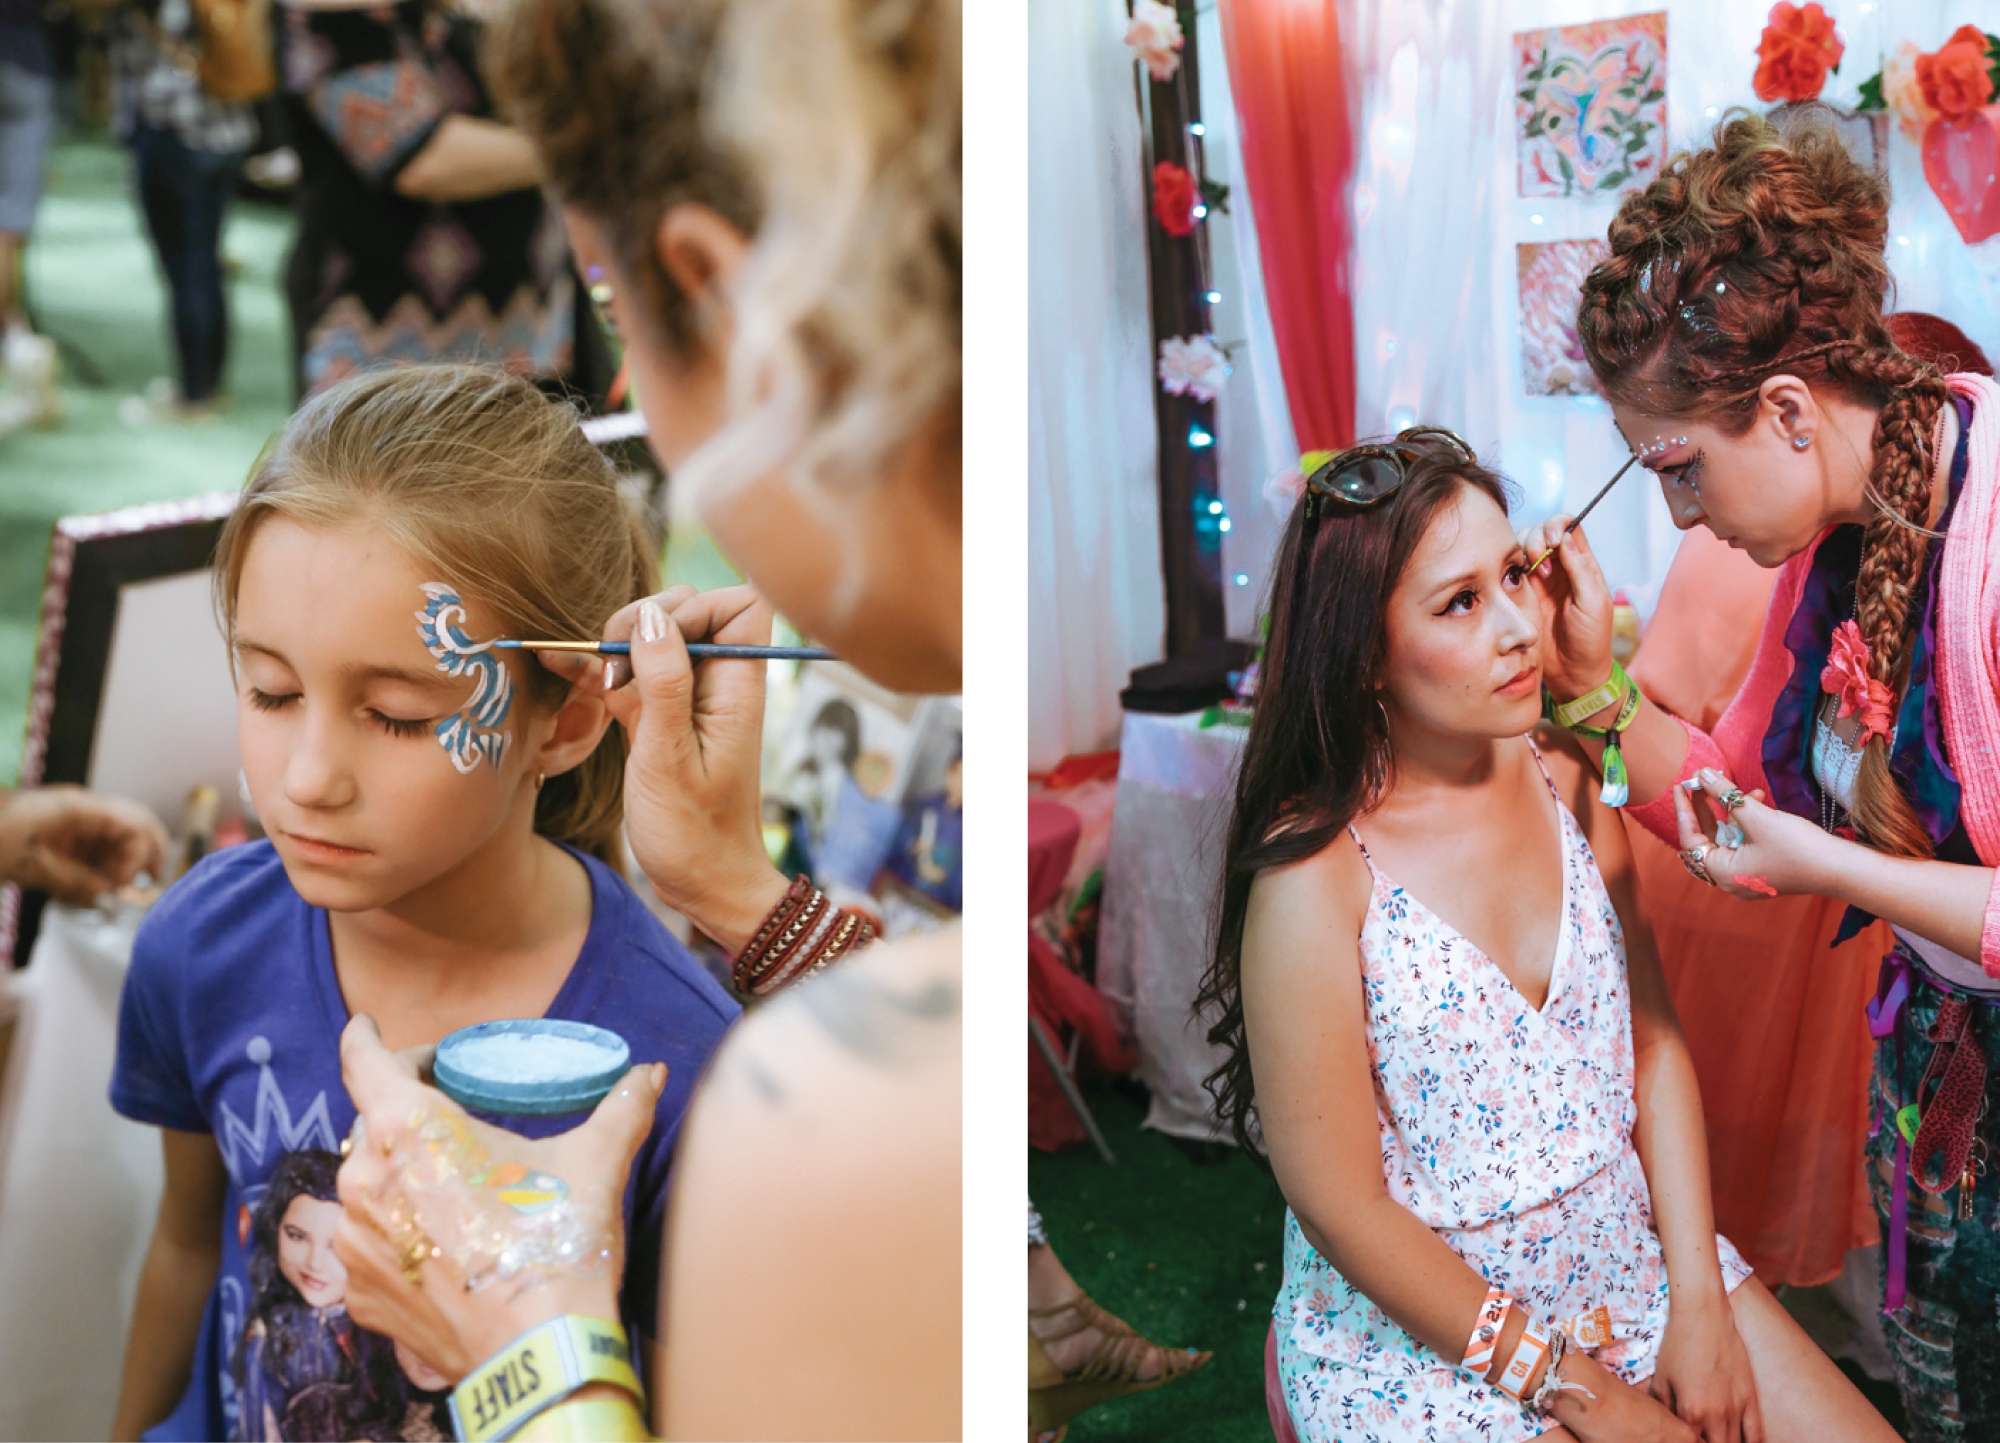 BottleRock Napa Valley Photography Portraits of C-Love Team Makeup Face Paint Artistry by Amarie Design Co.